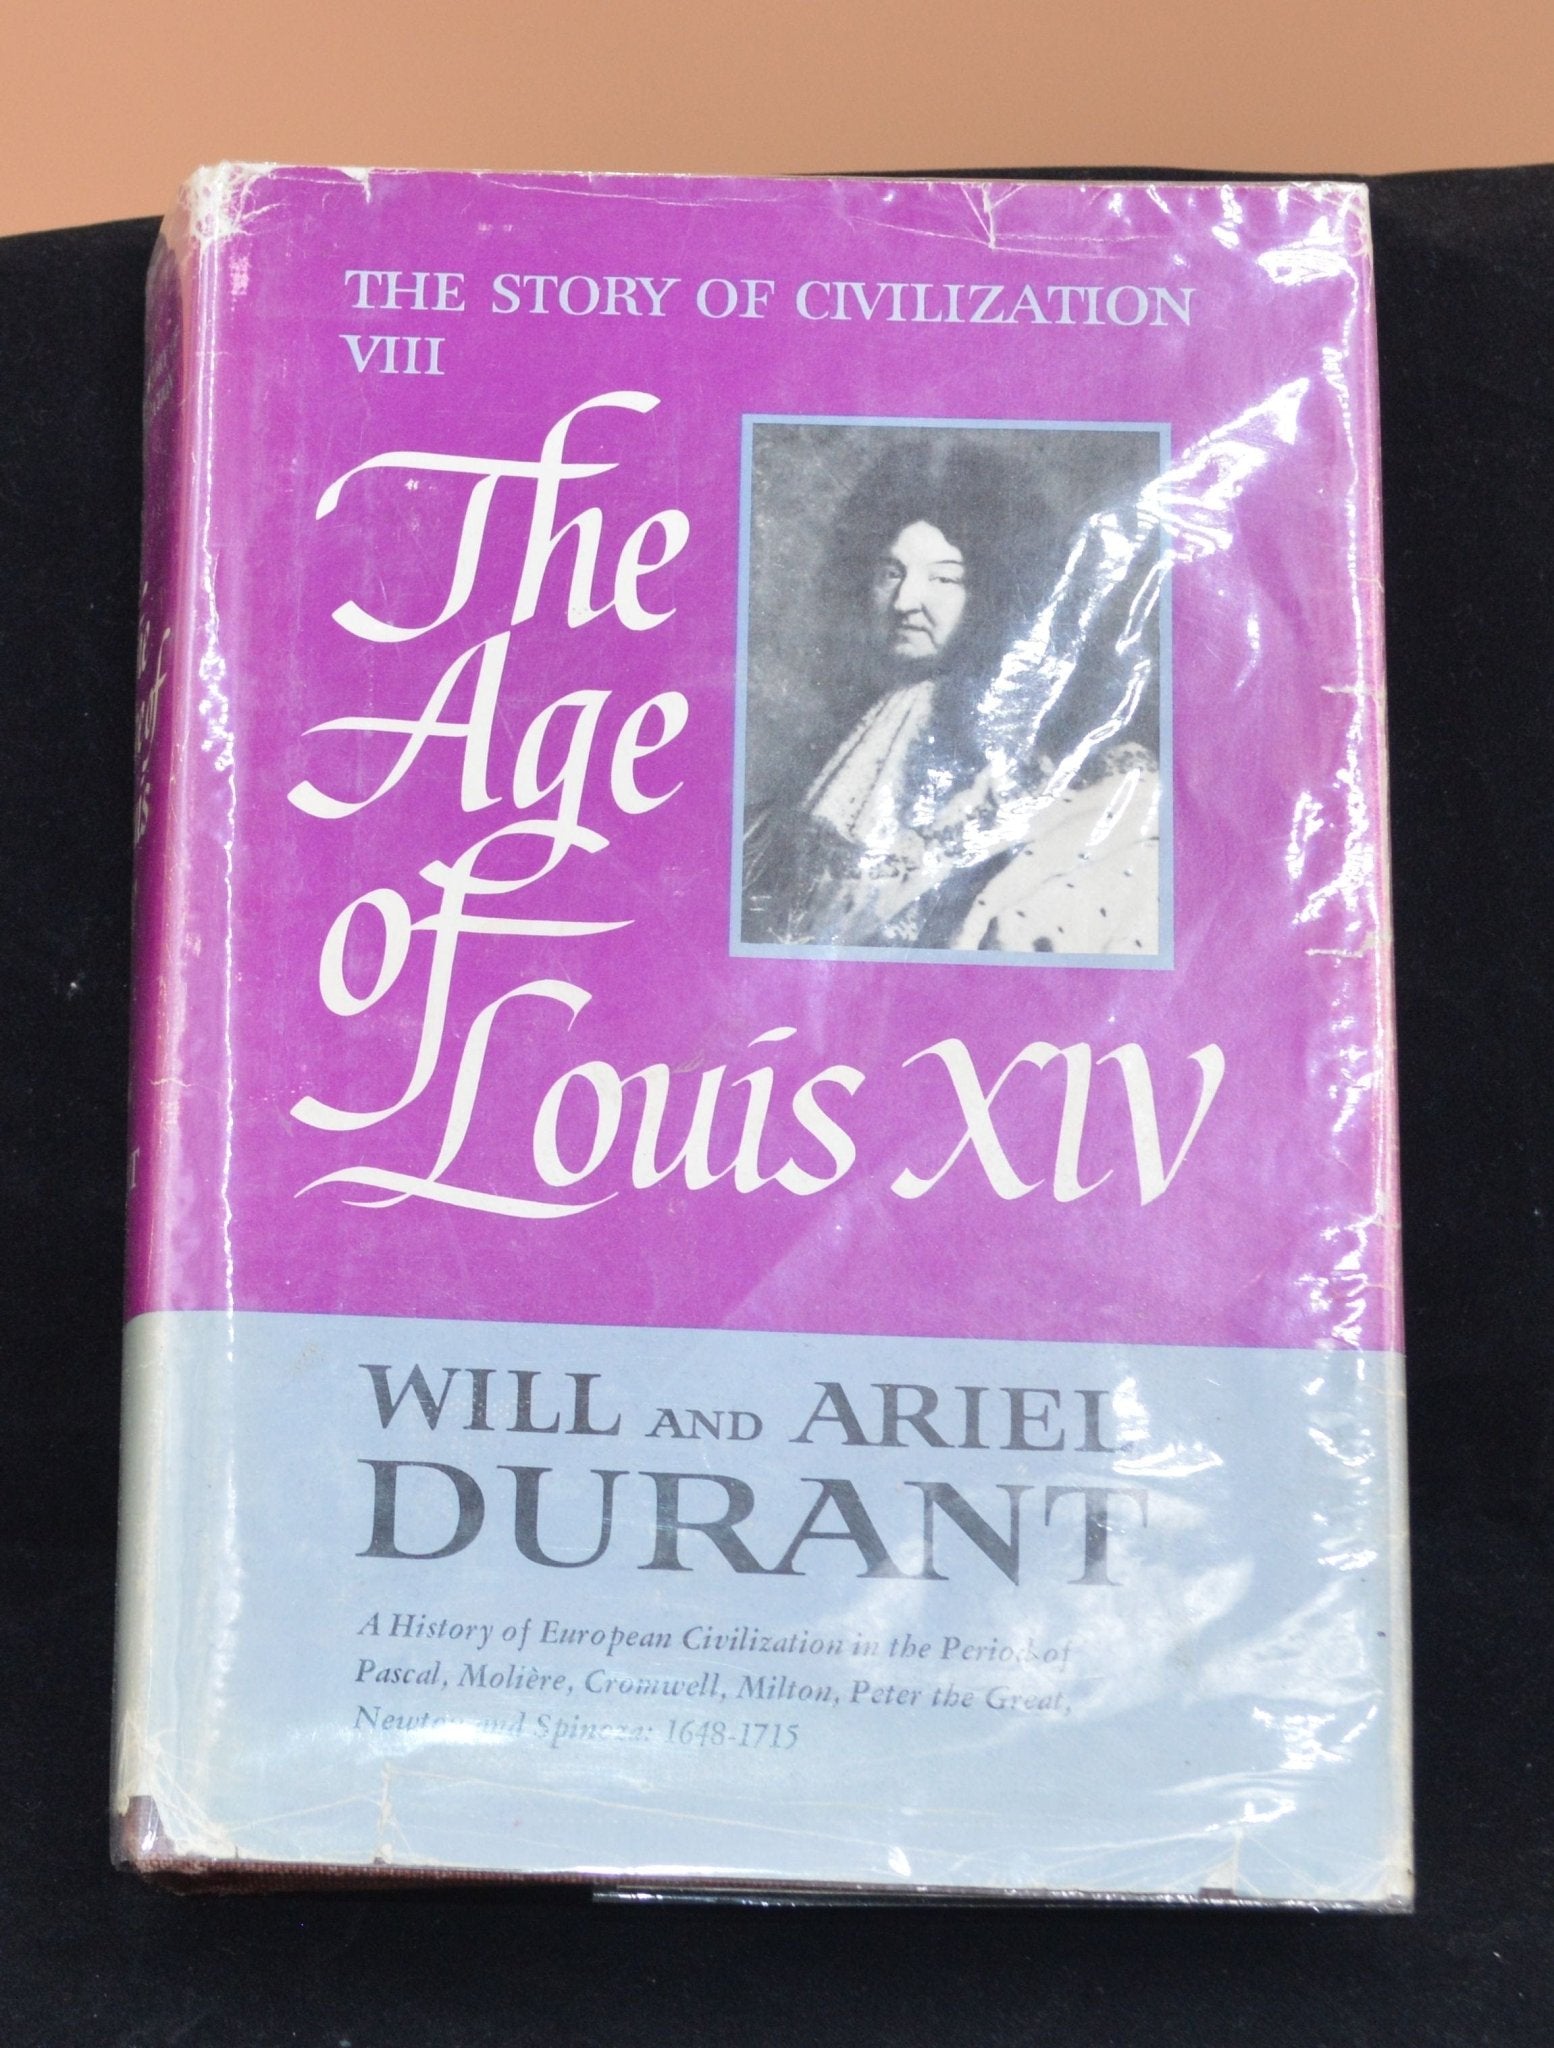 SECONDHAND BOOK THE AGE OF LOUIS XIV by WILL & ARIEL DURANT(PREVIOUSLY OWNED) GOOD CONDITION - TMD167207